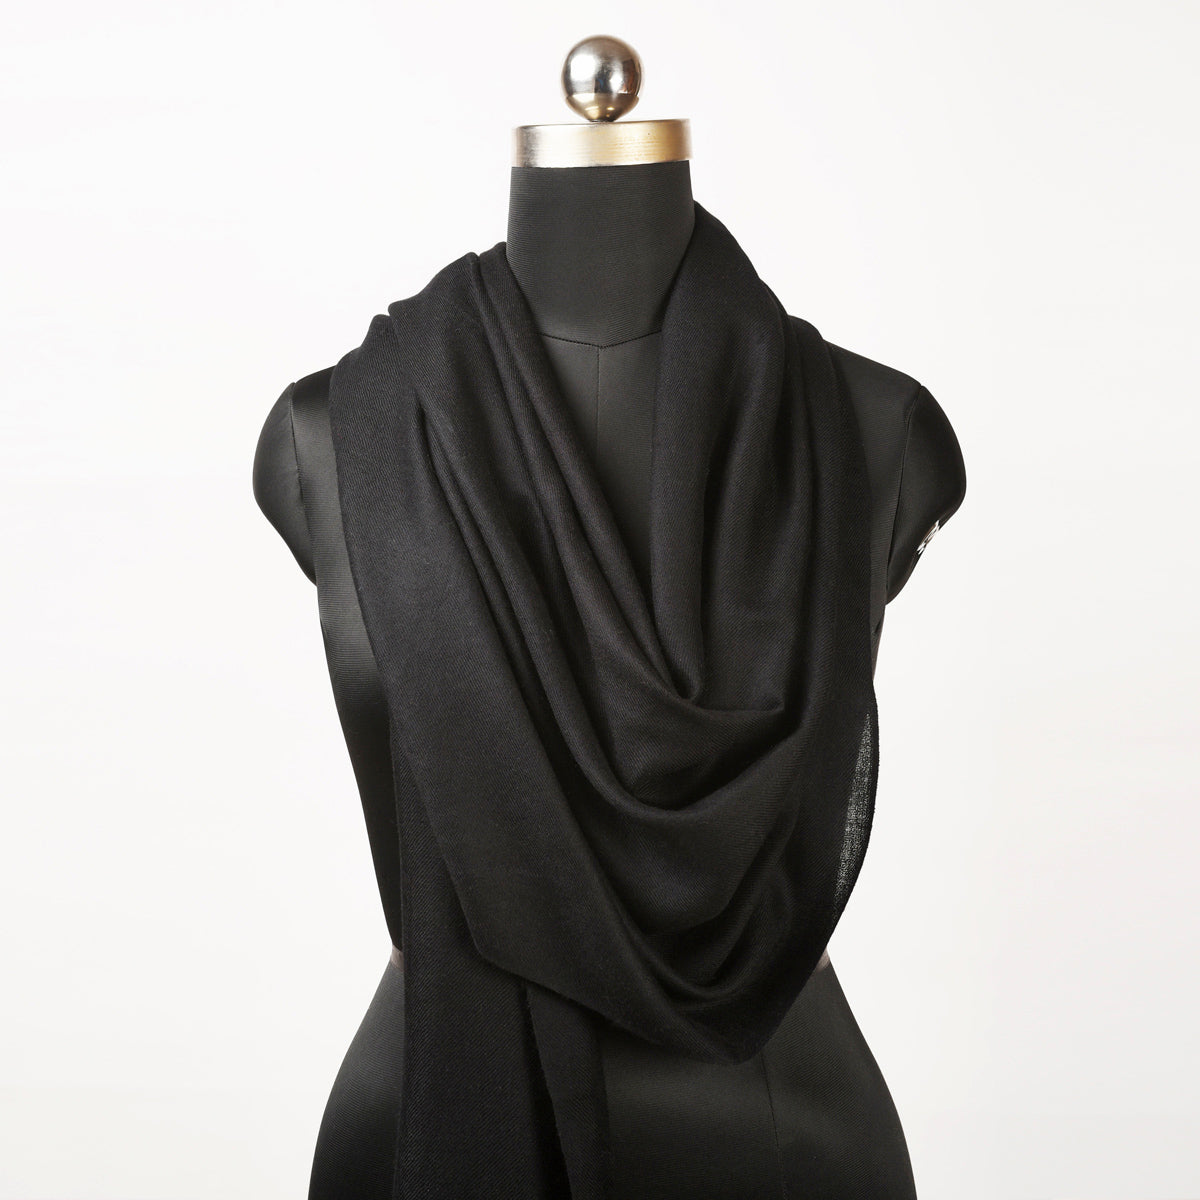 Black fine wool scarf women, solid colour, reversible, fashion shawl or stole or wrap, gift for women